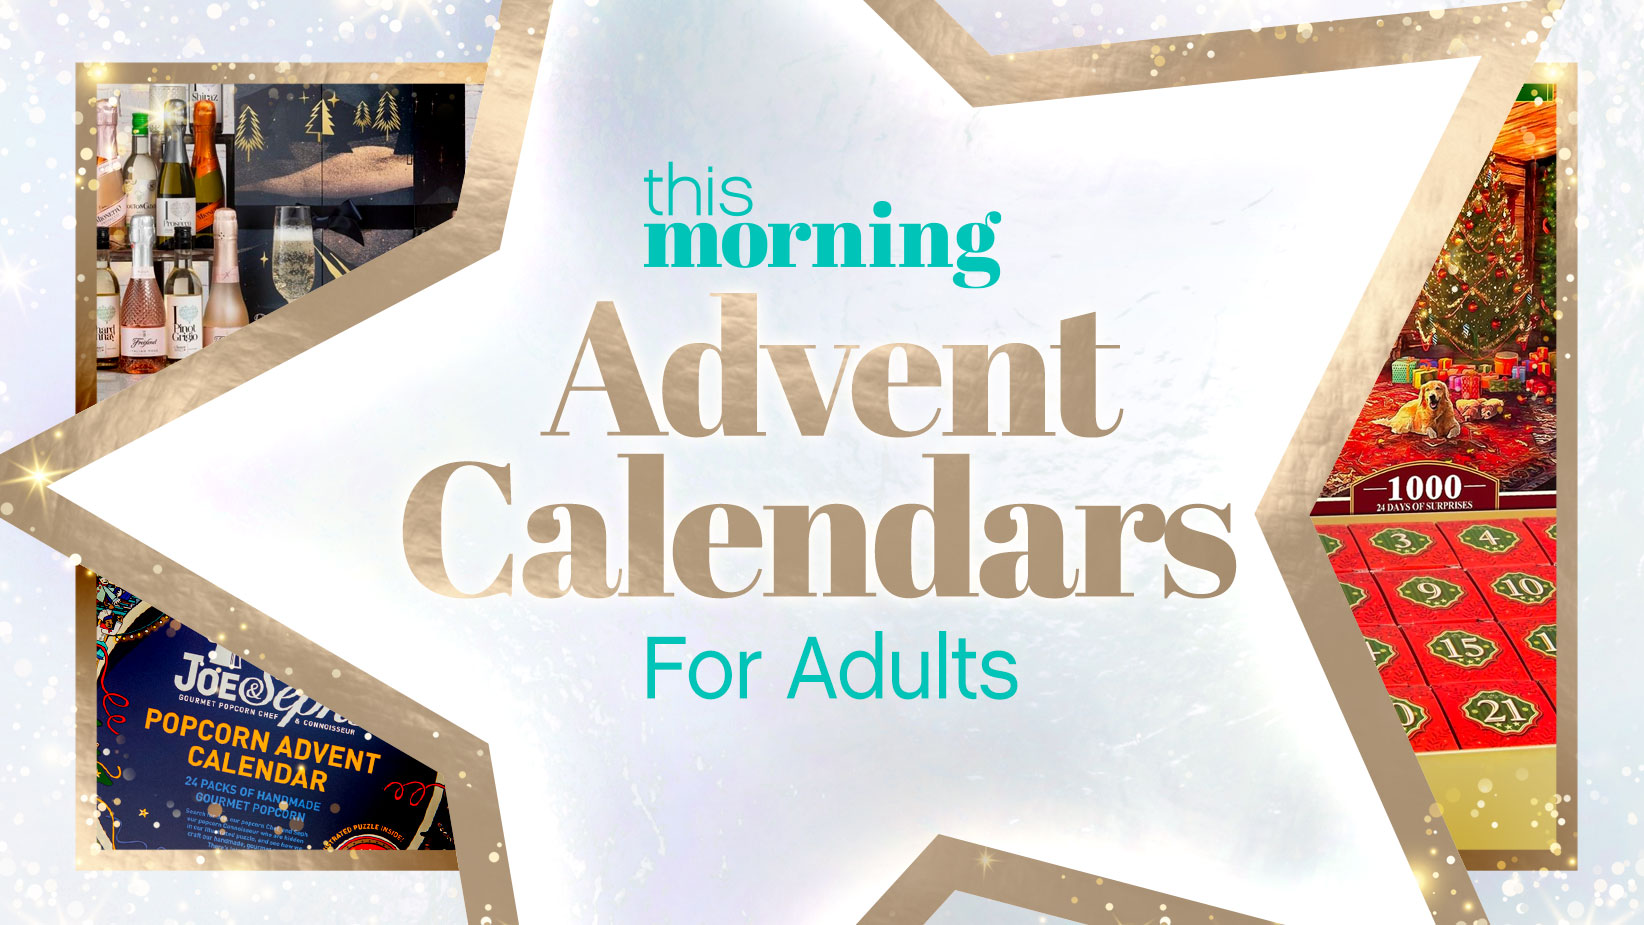 Take a look at these must-have advent calendars for adults